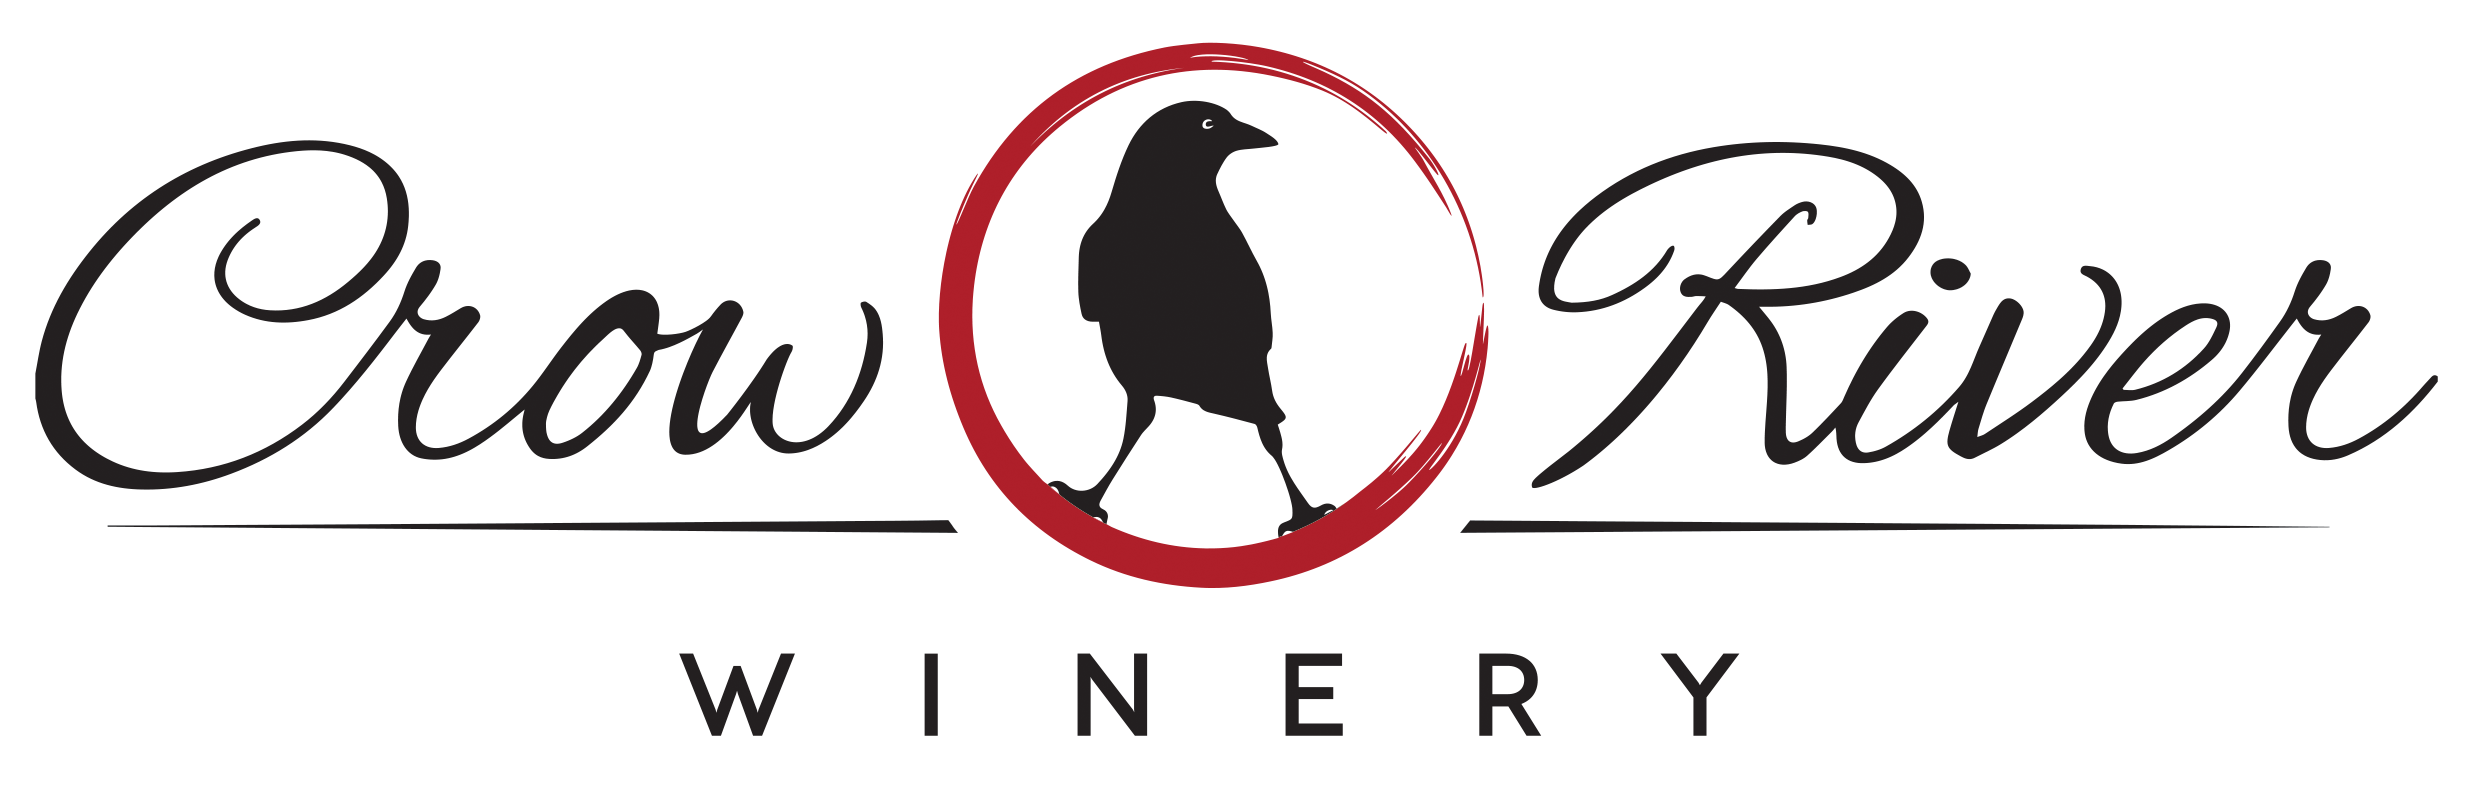 crow-river-winery.png